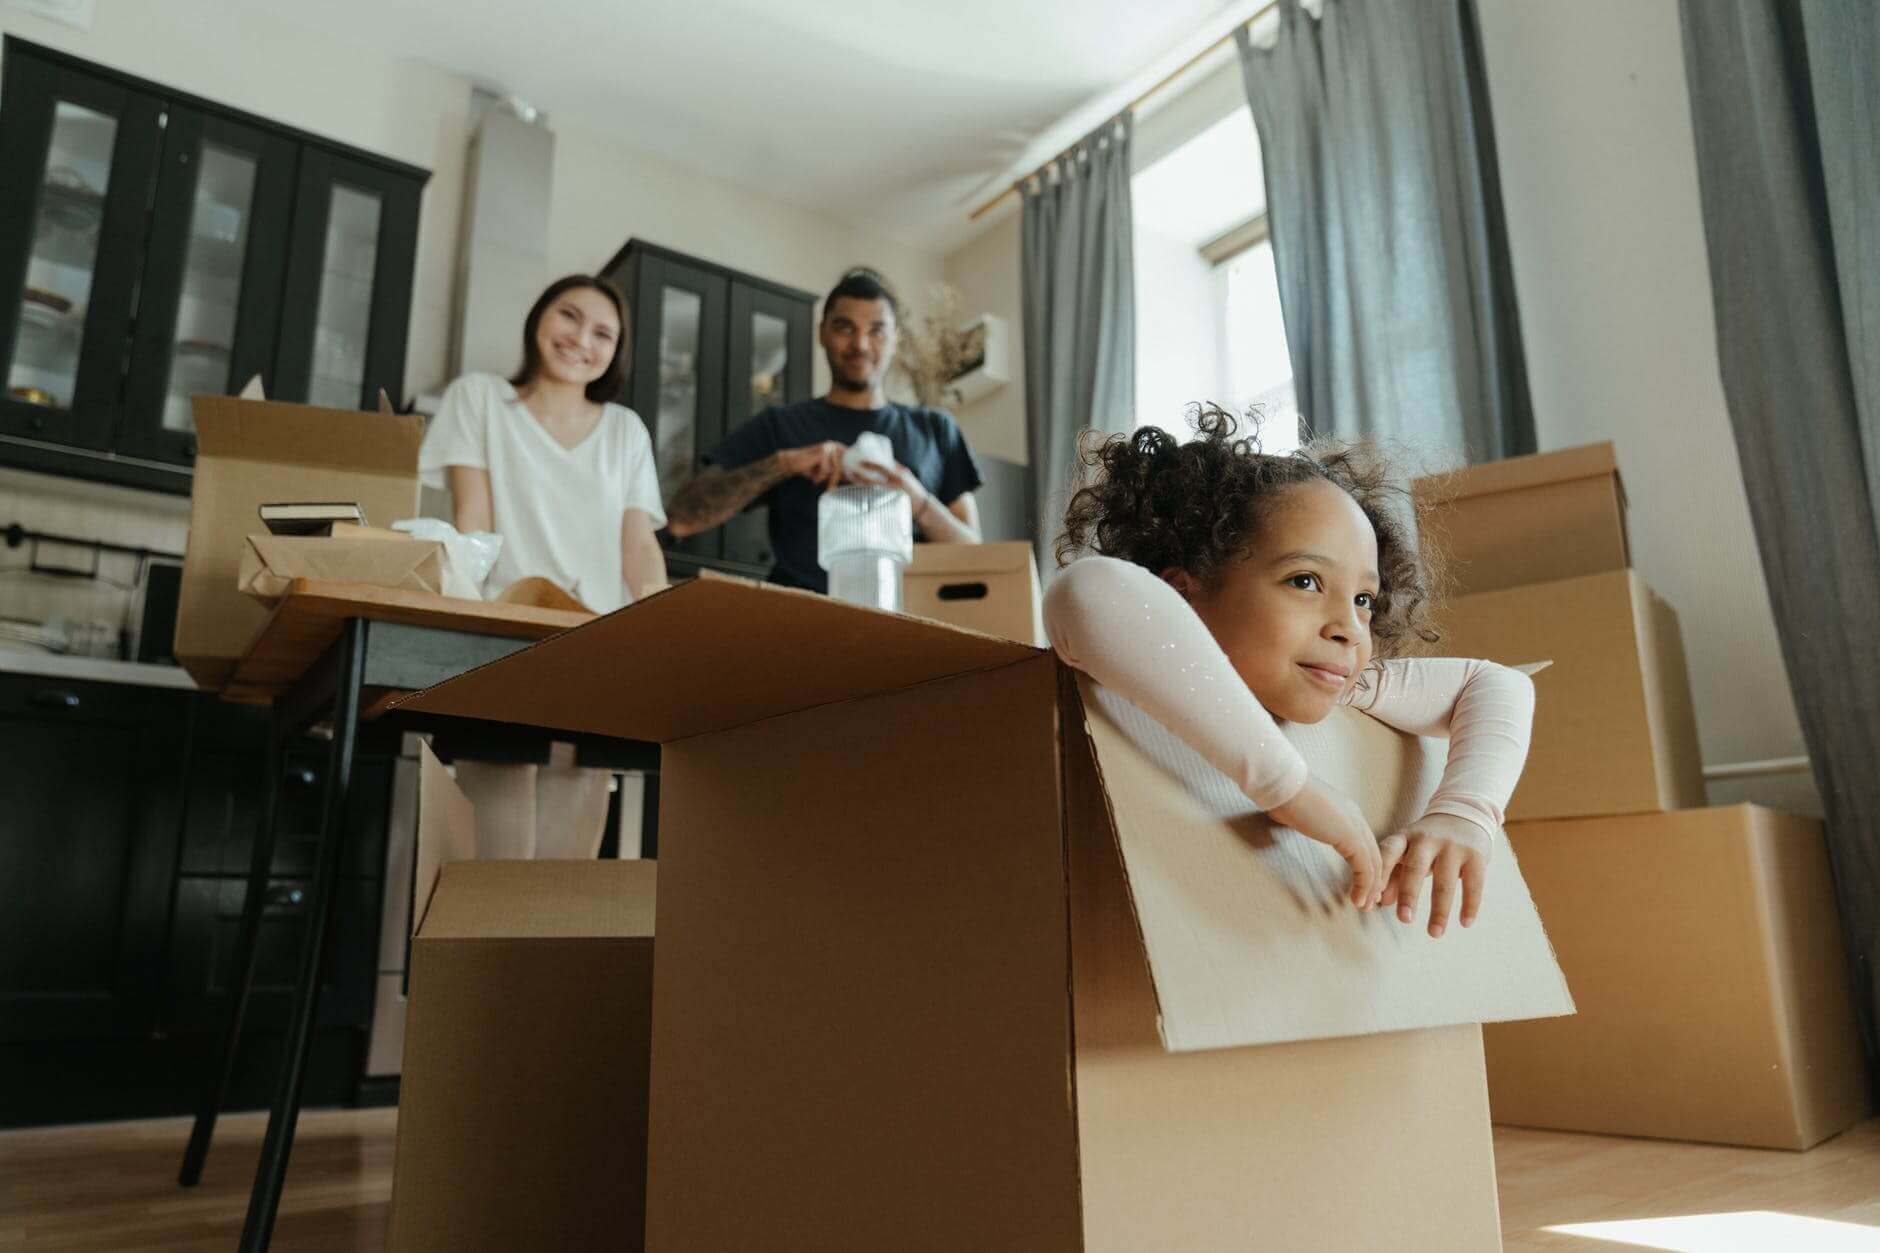 Photograph of a smiling child emerging from a cardboard box. There are two adults behind her, probably the parents, smiling at her. There are lots of other cardboard boxes in the room waiting to be packed.